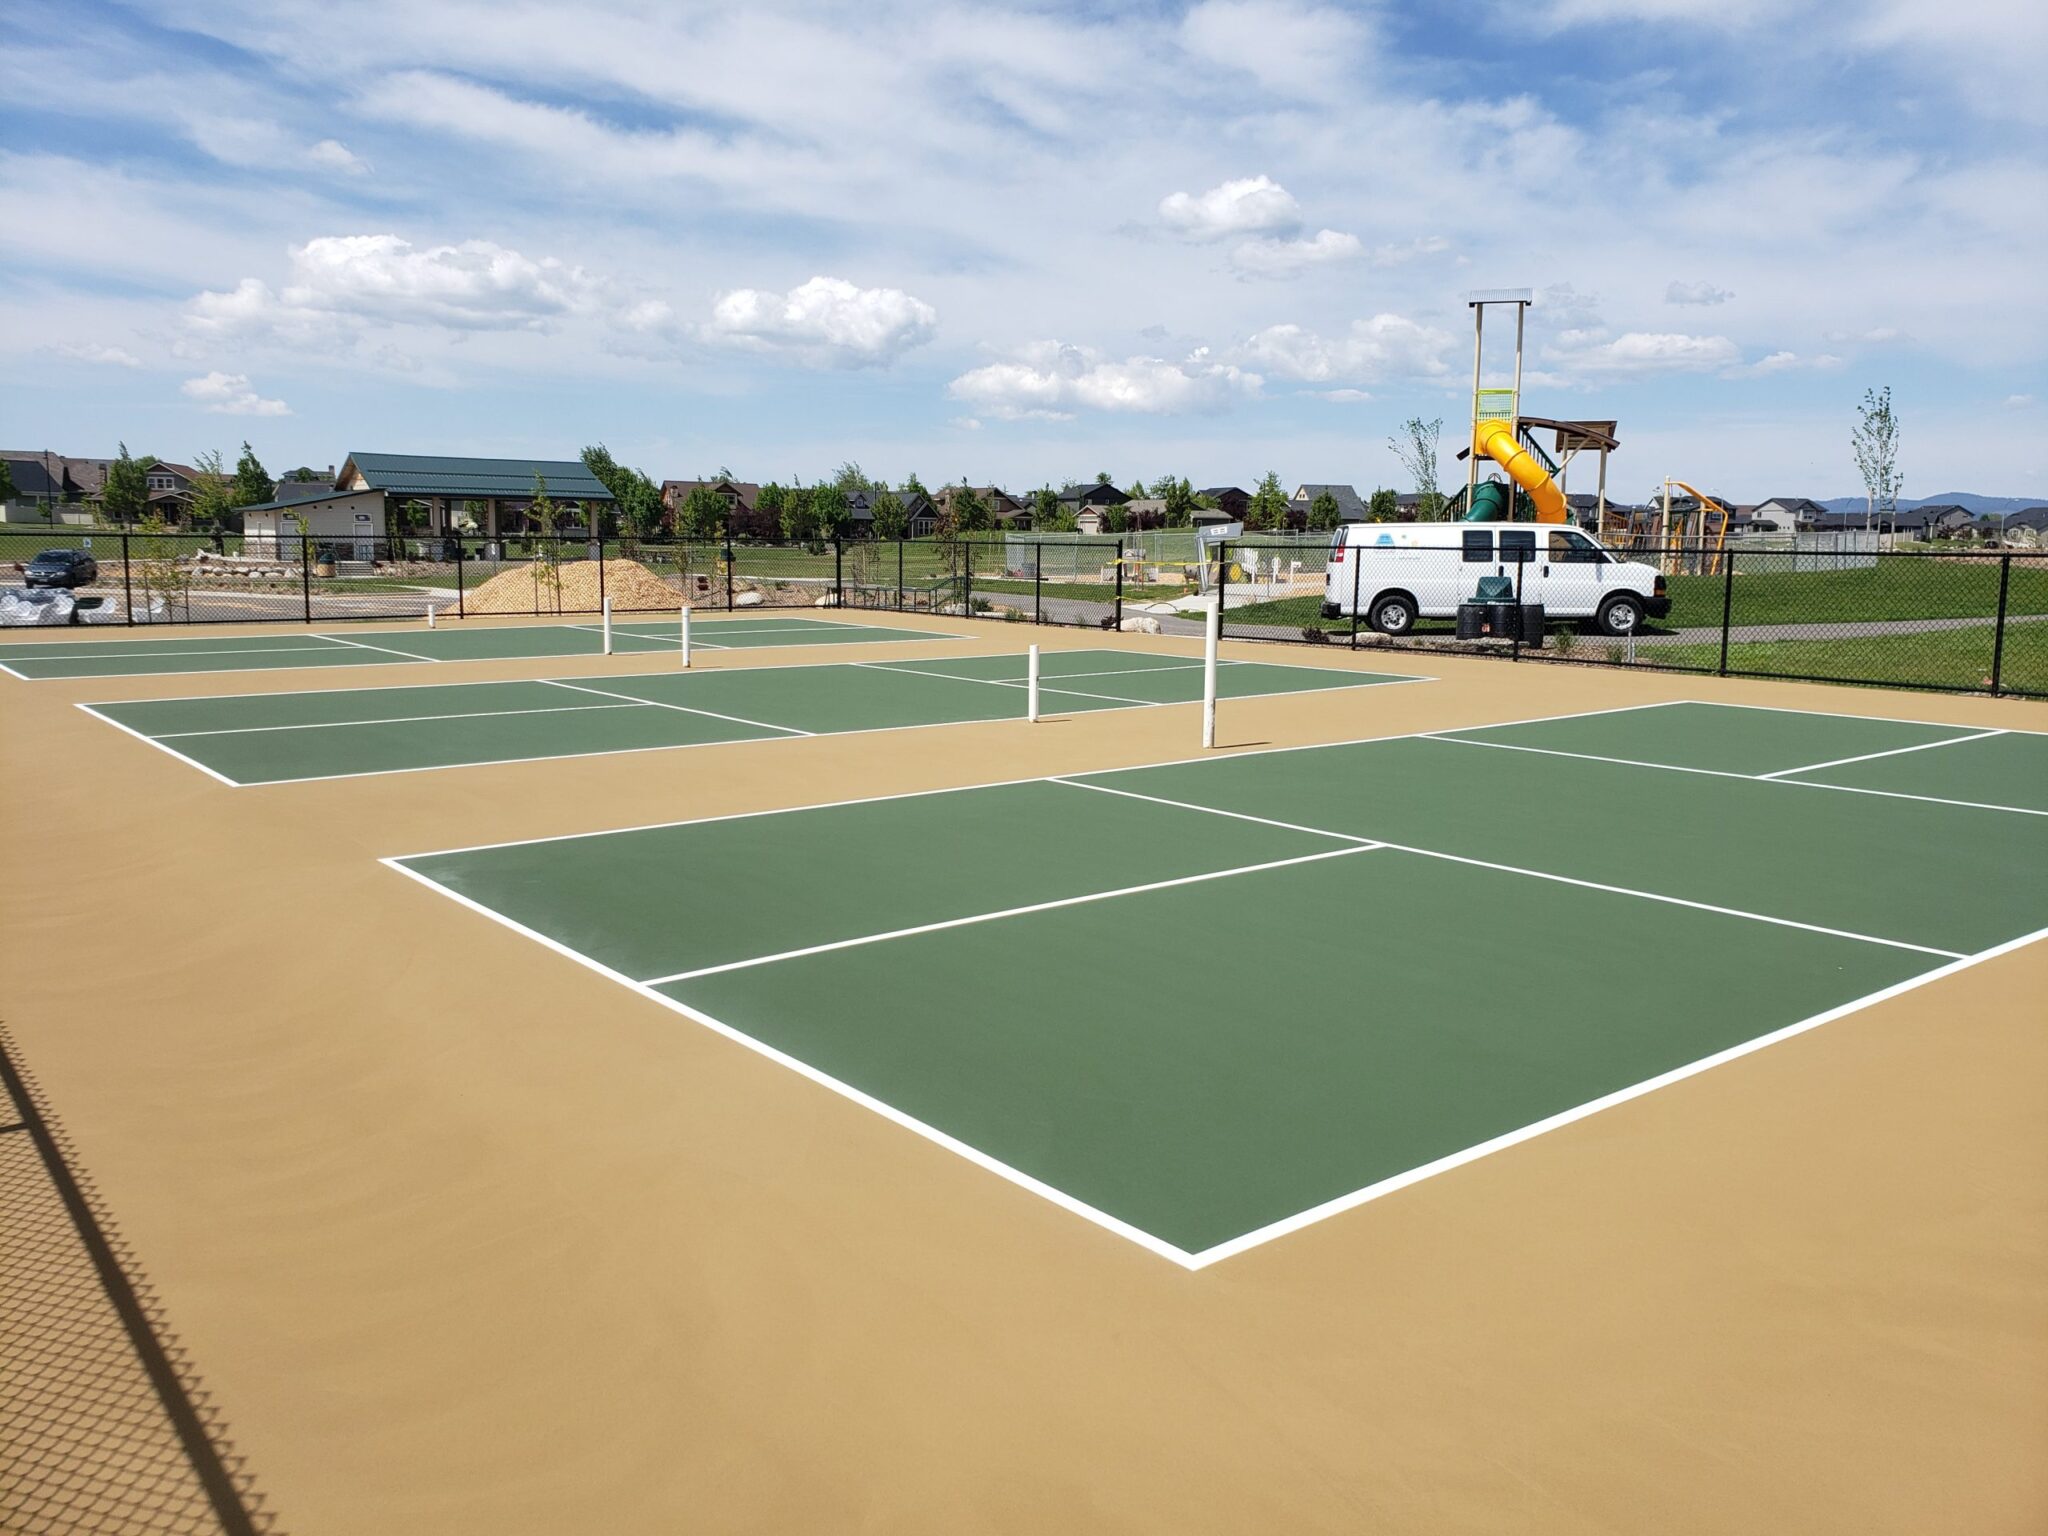 A newly surfaced set of three pickleball courts with green, white, and tan colors